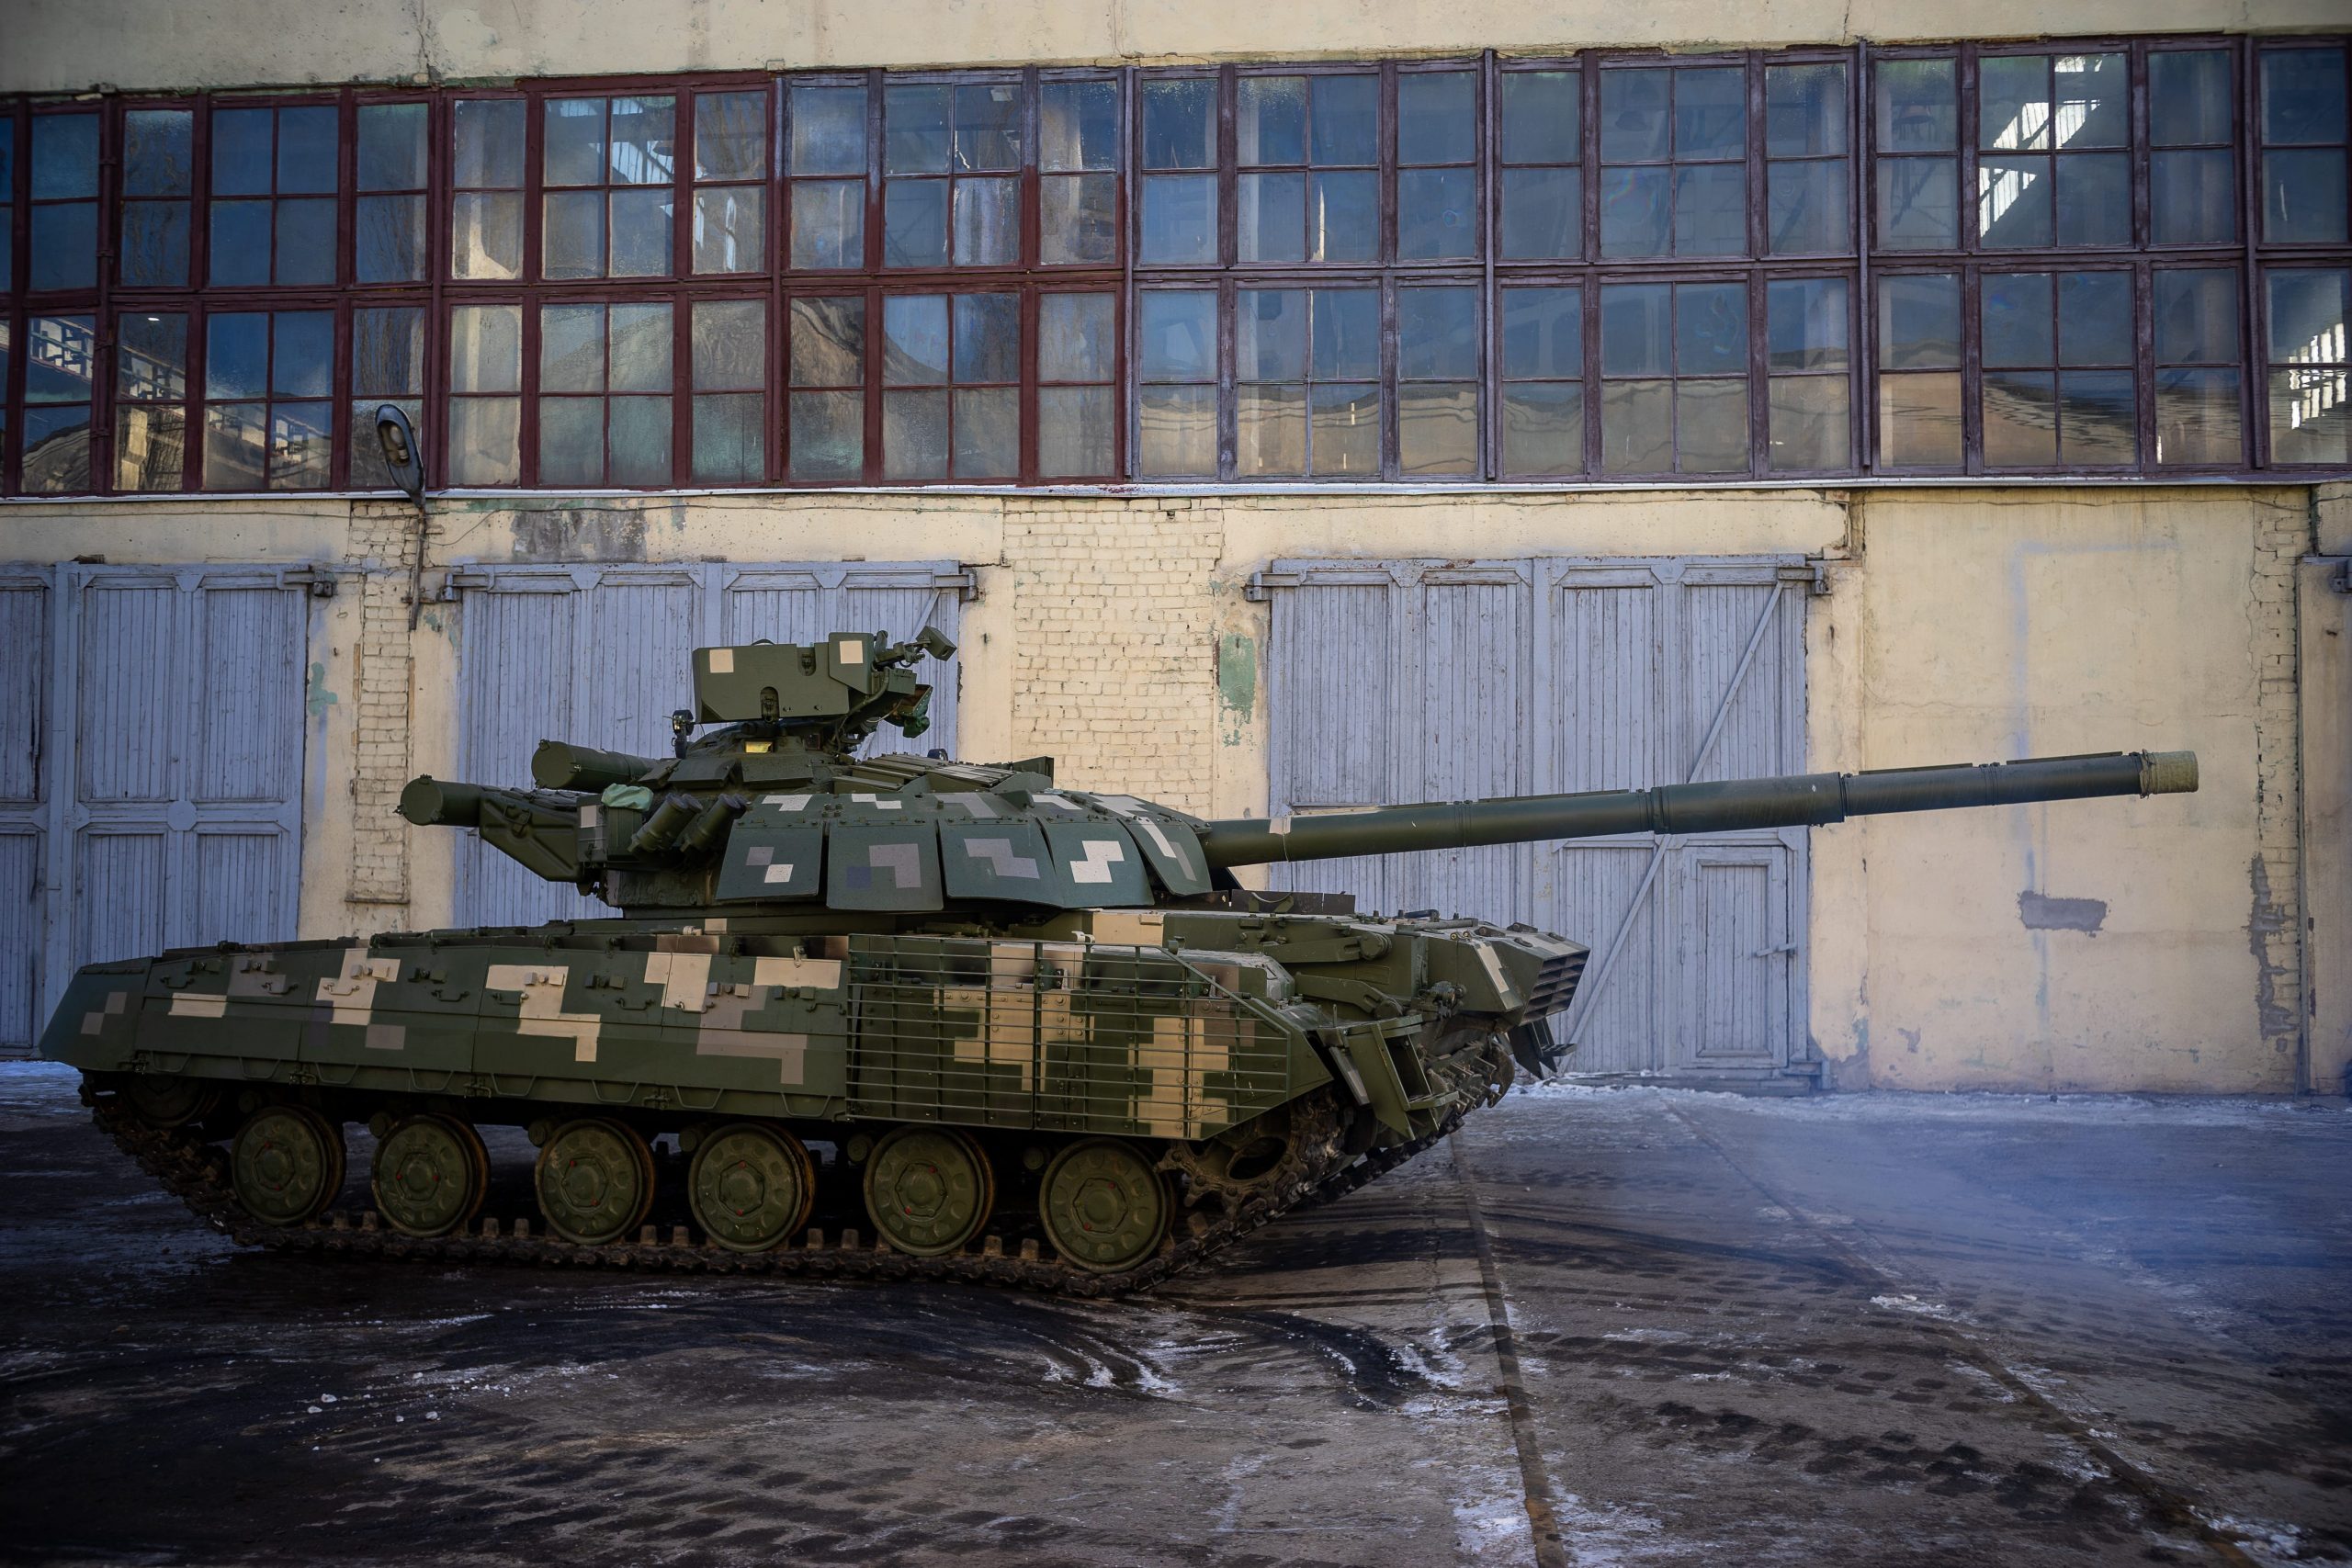 A tank is seen next to a building.